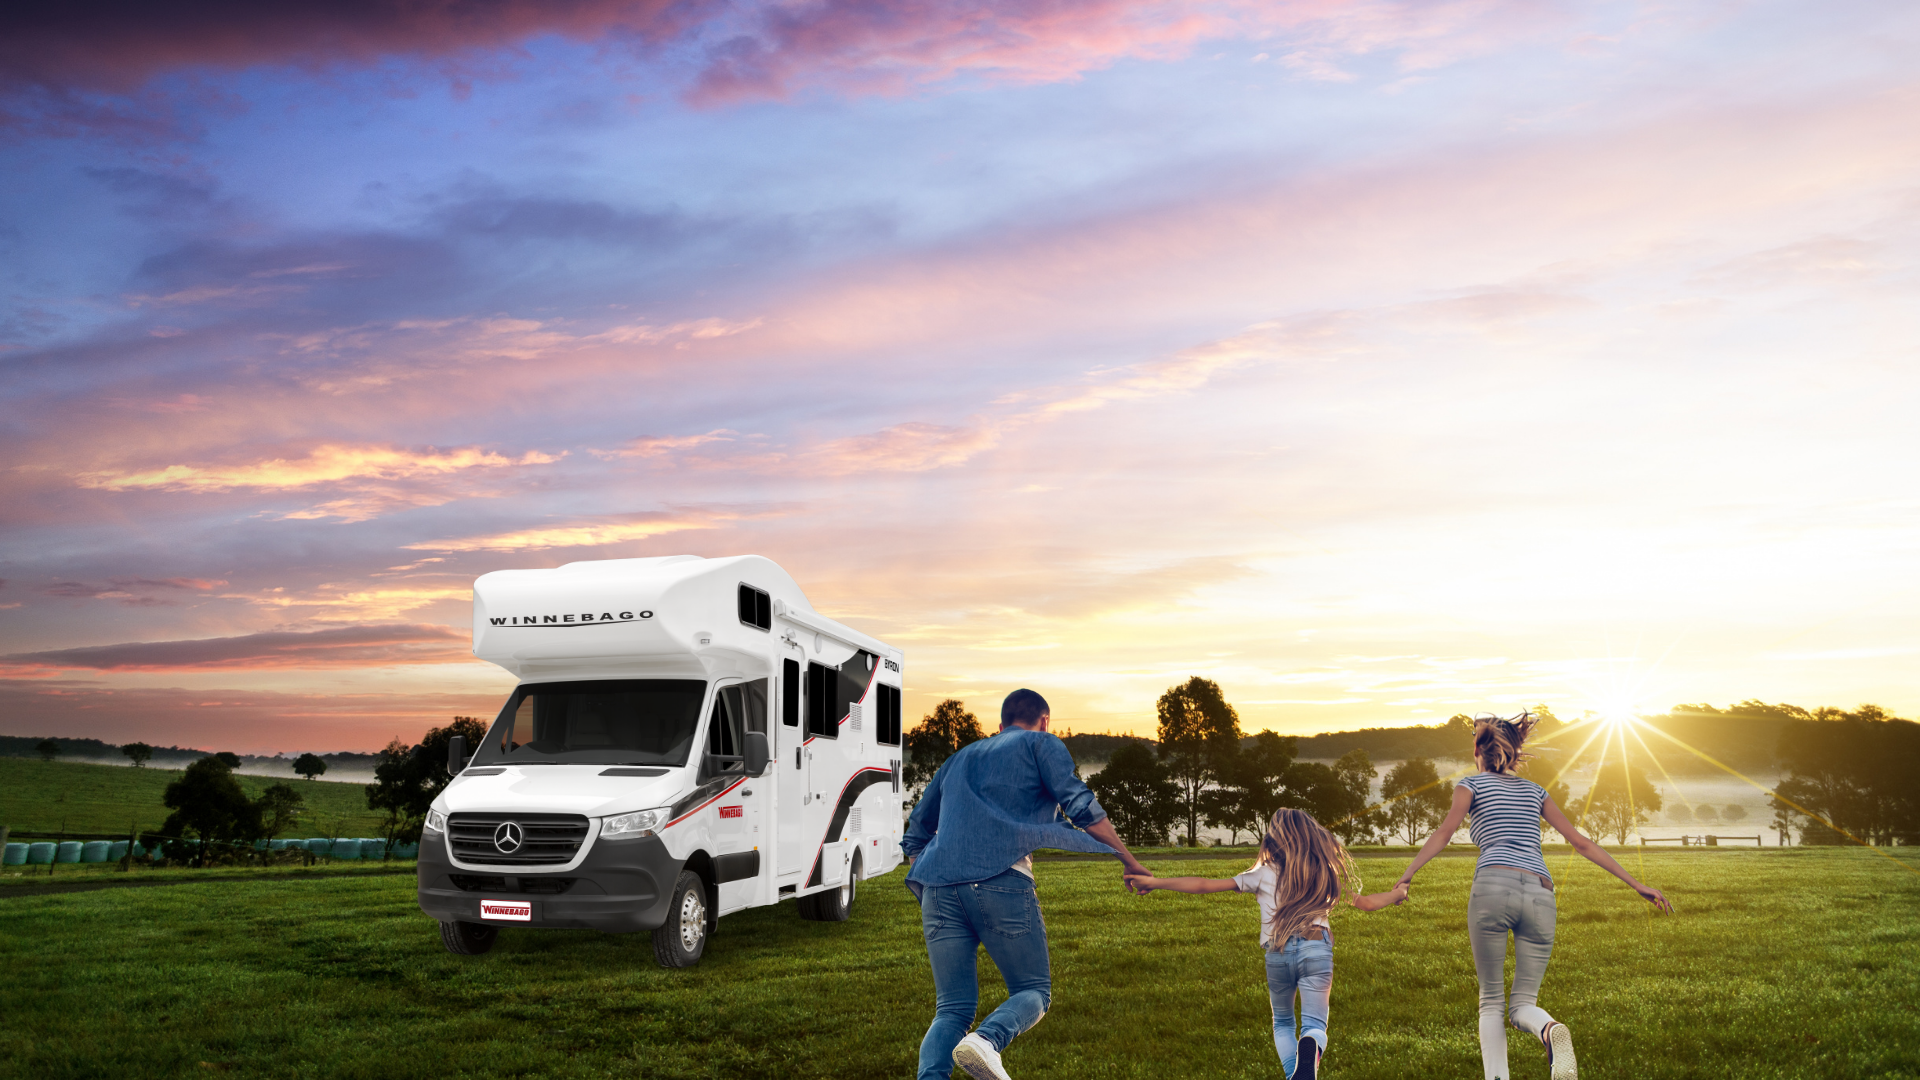 motorhome parked on a grass field during sunset with three people running towards it